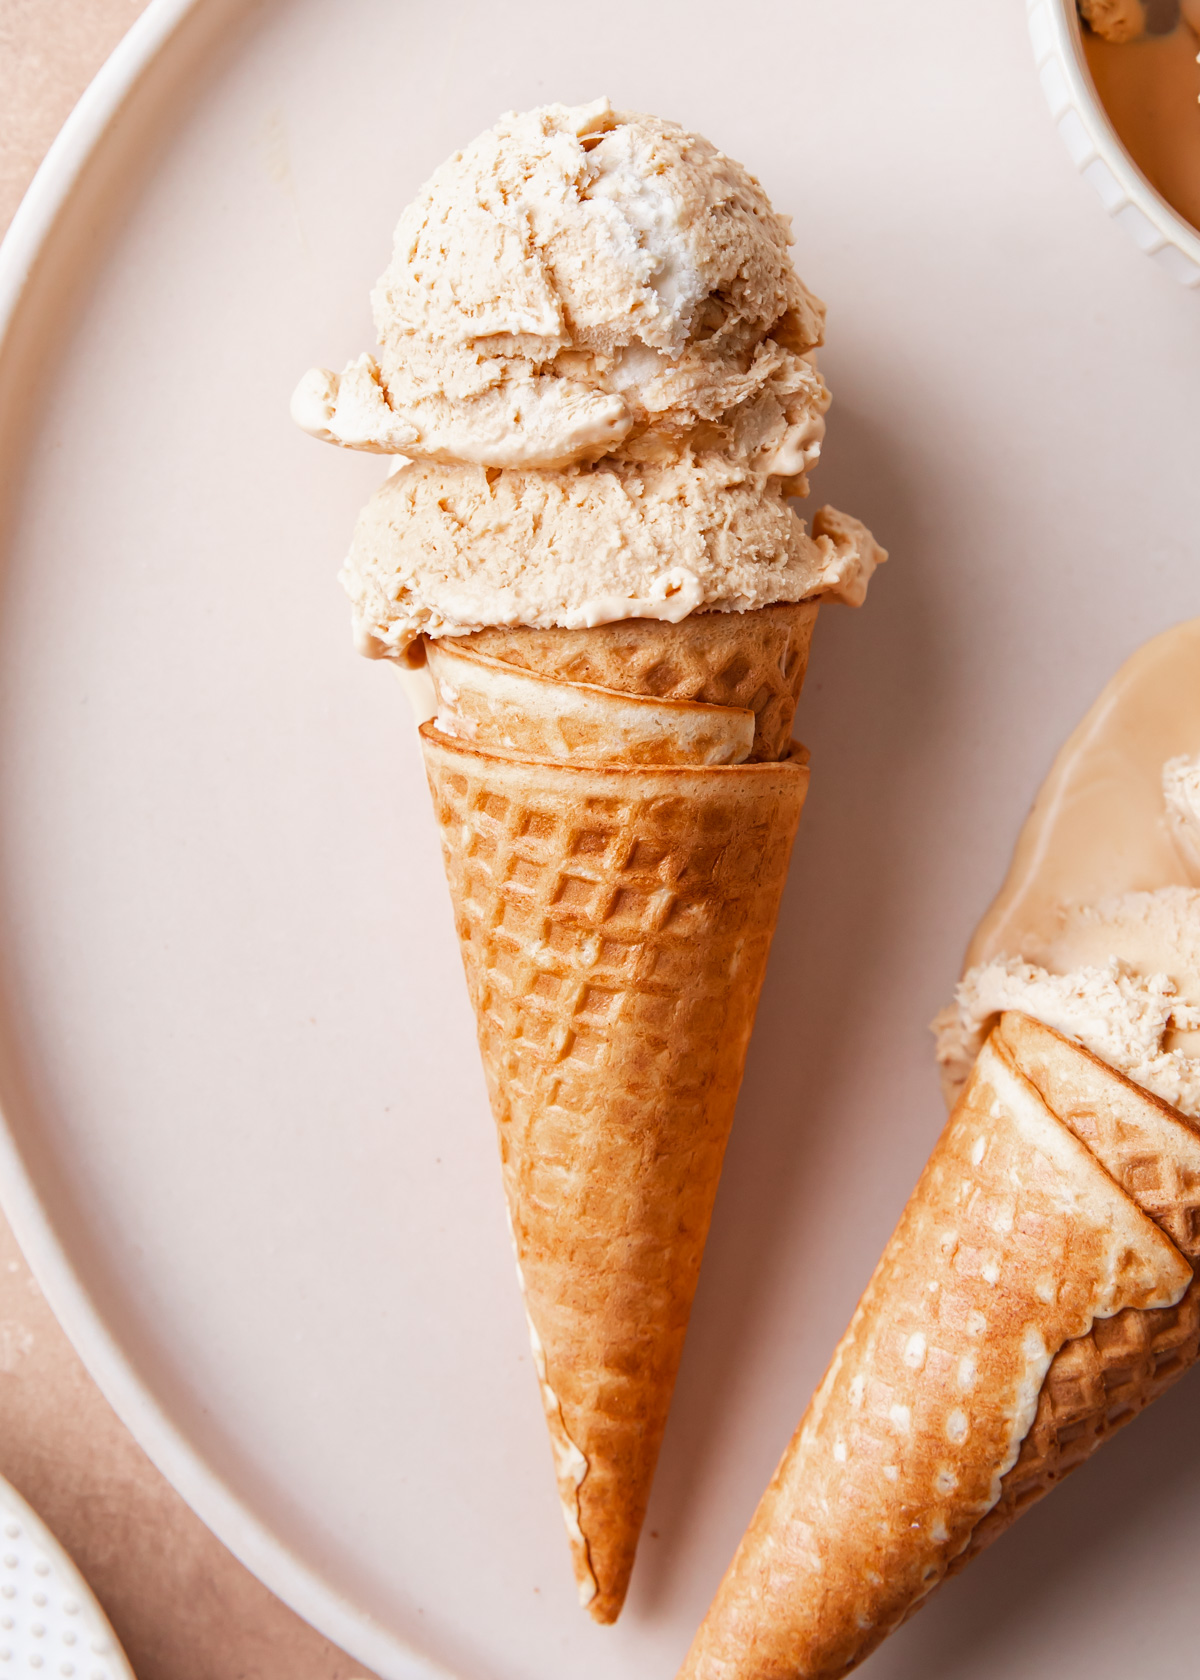 A close-up of an ice cream cone with two scoops of dulce de leche ice cream